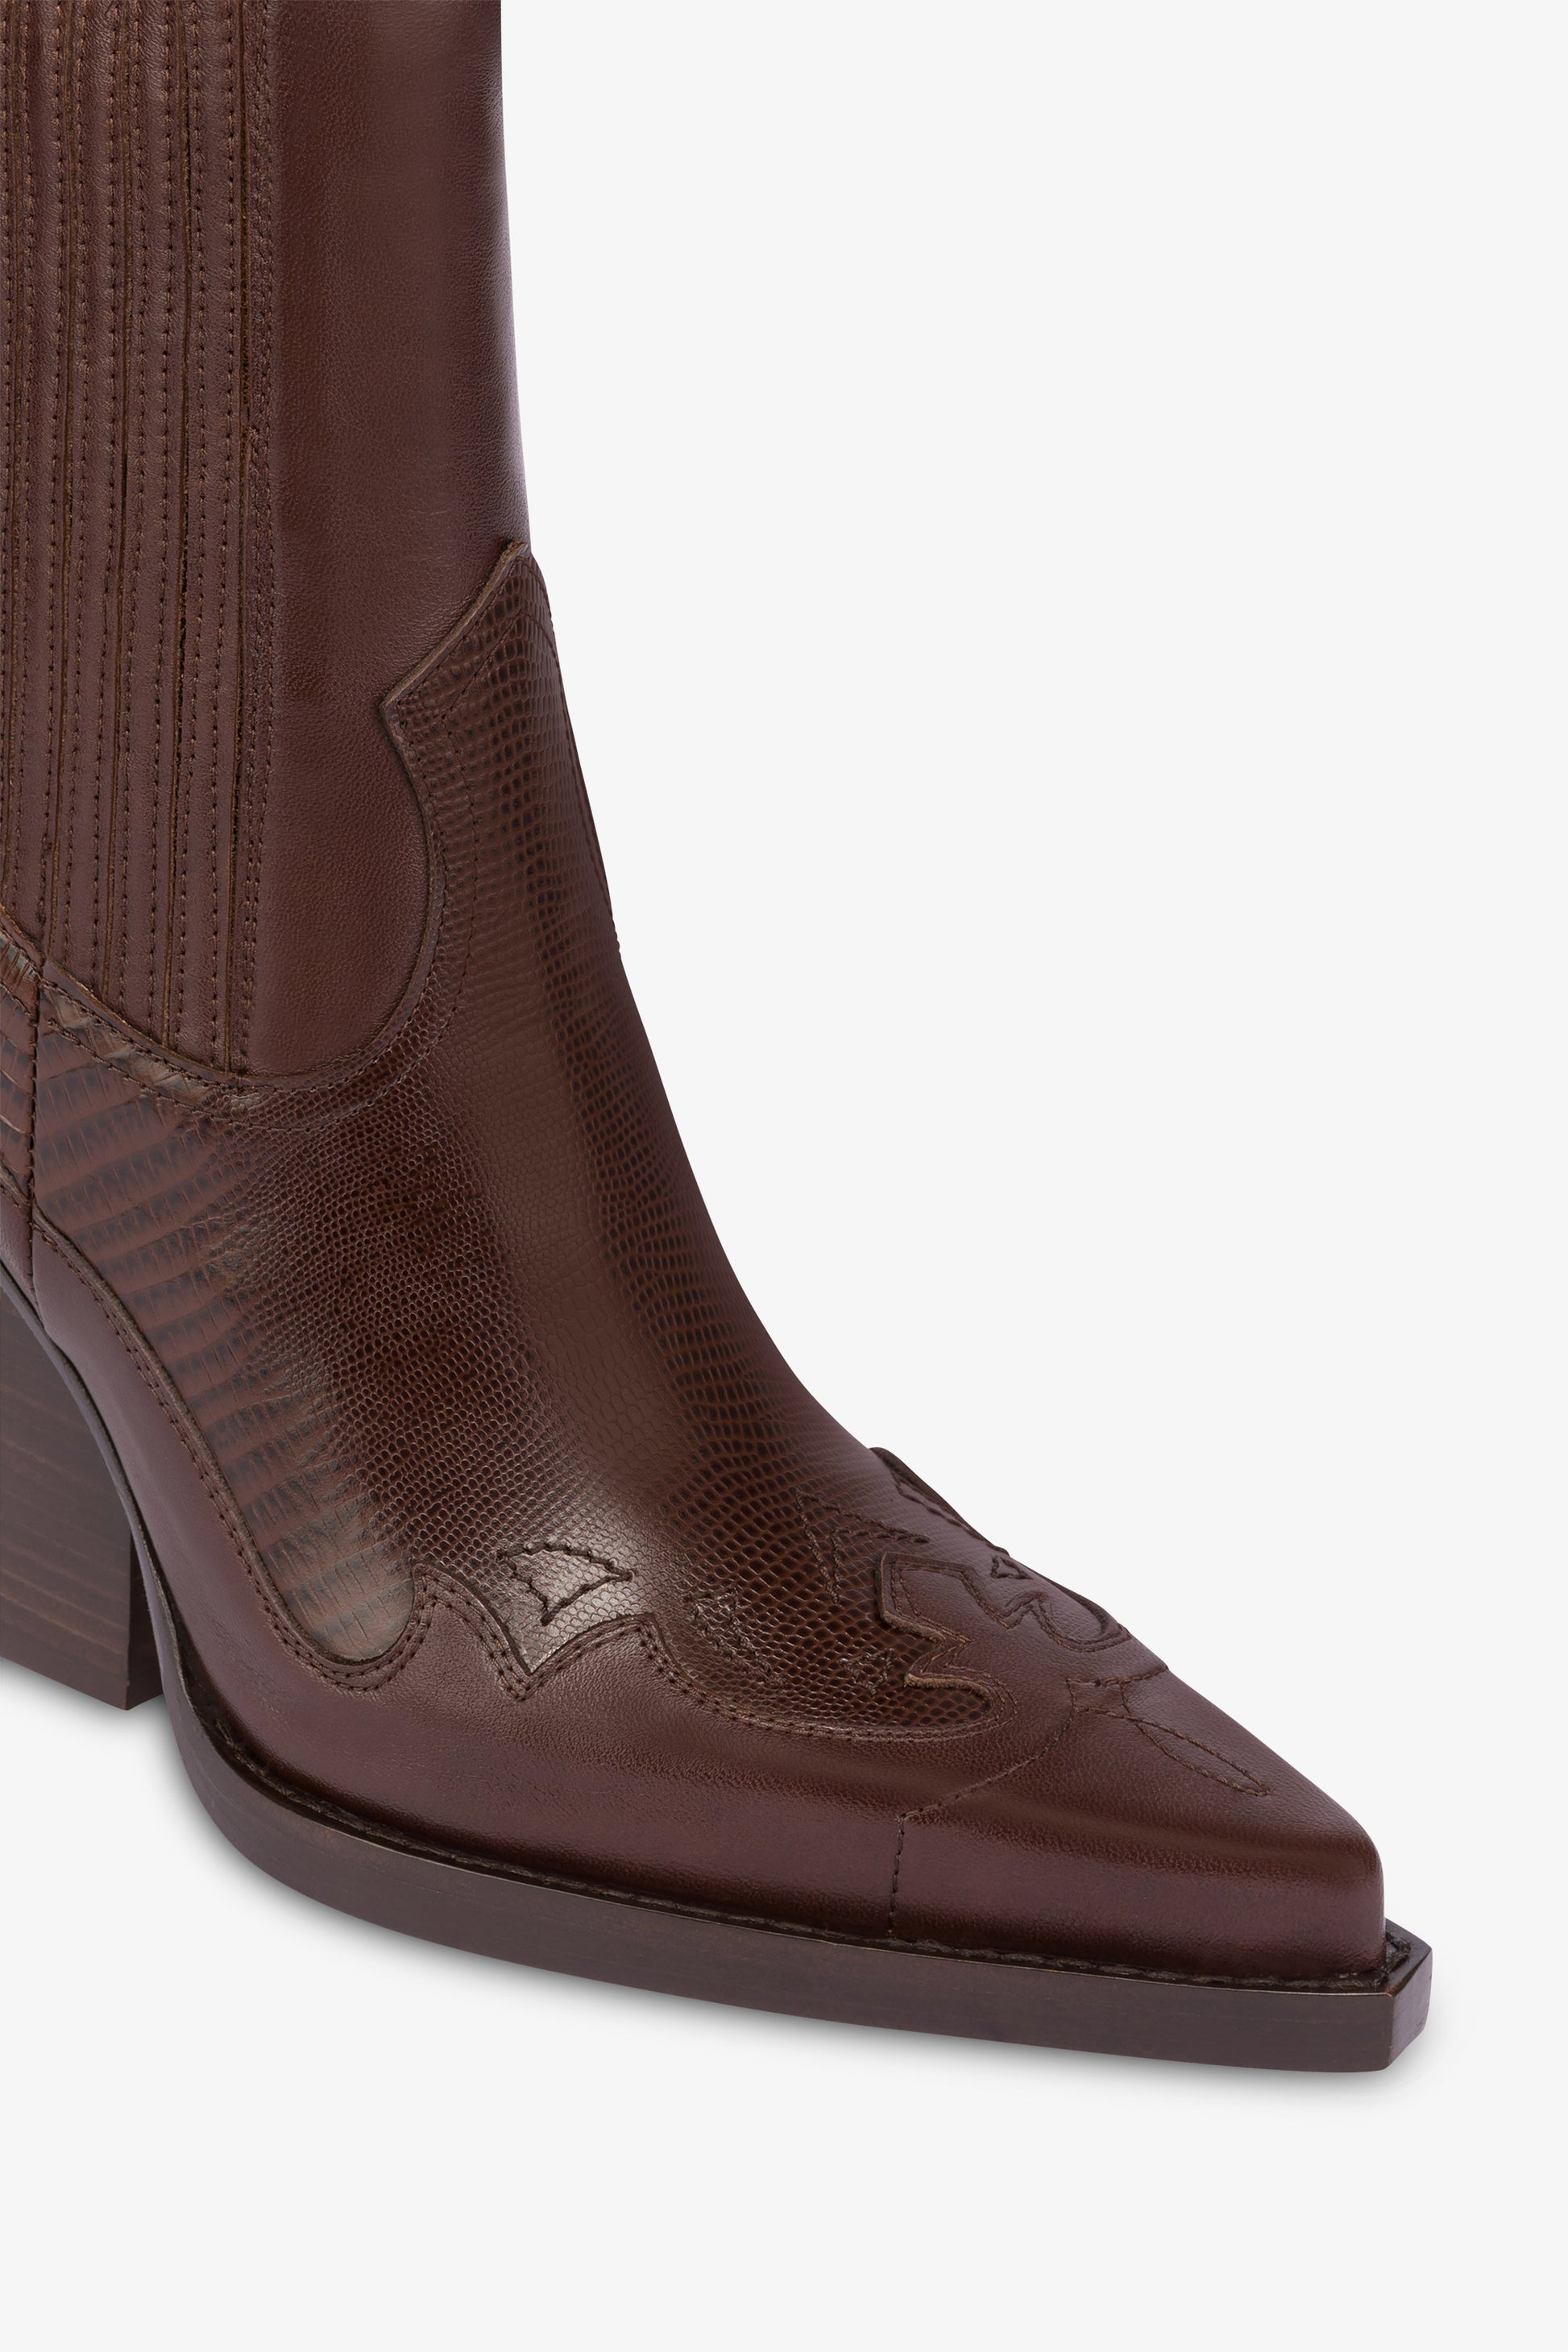 Pointed ankle boots in chocolate and mocha lizard-printed leather